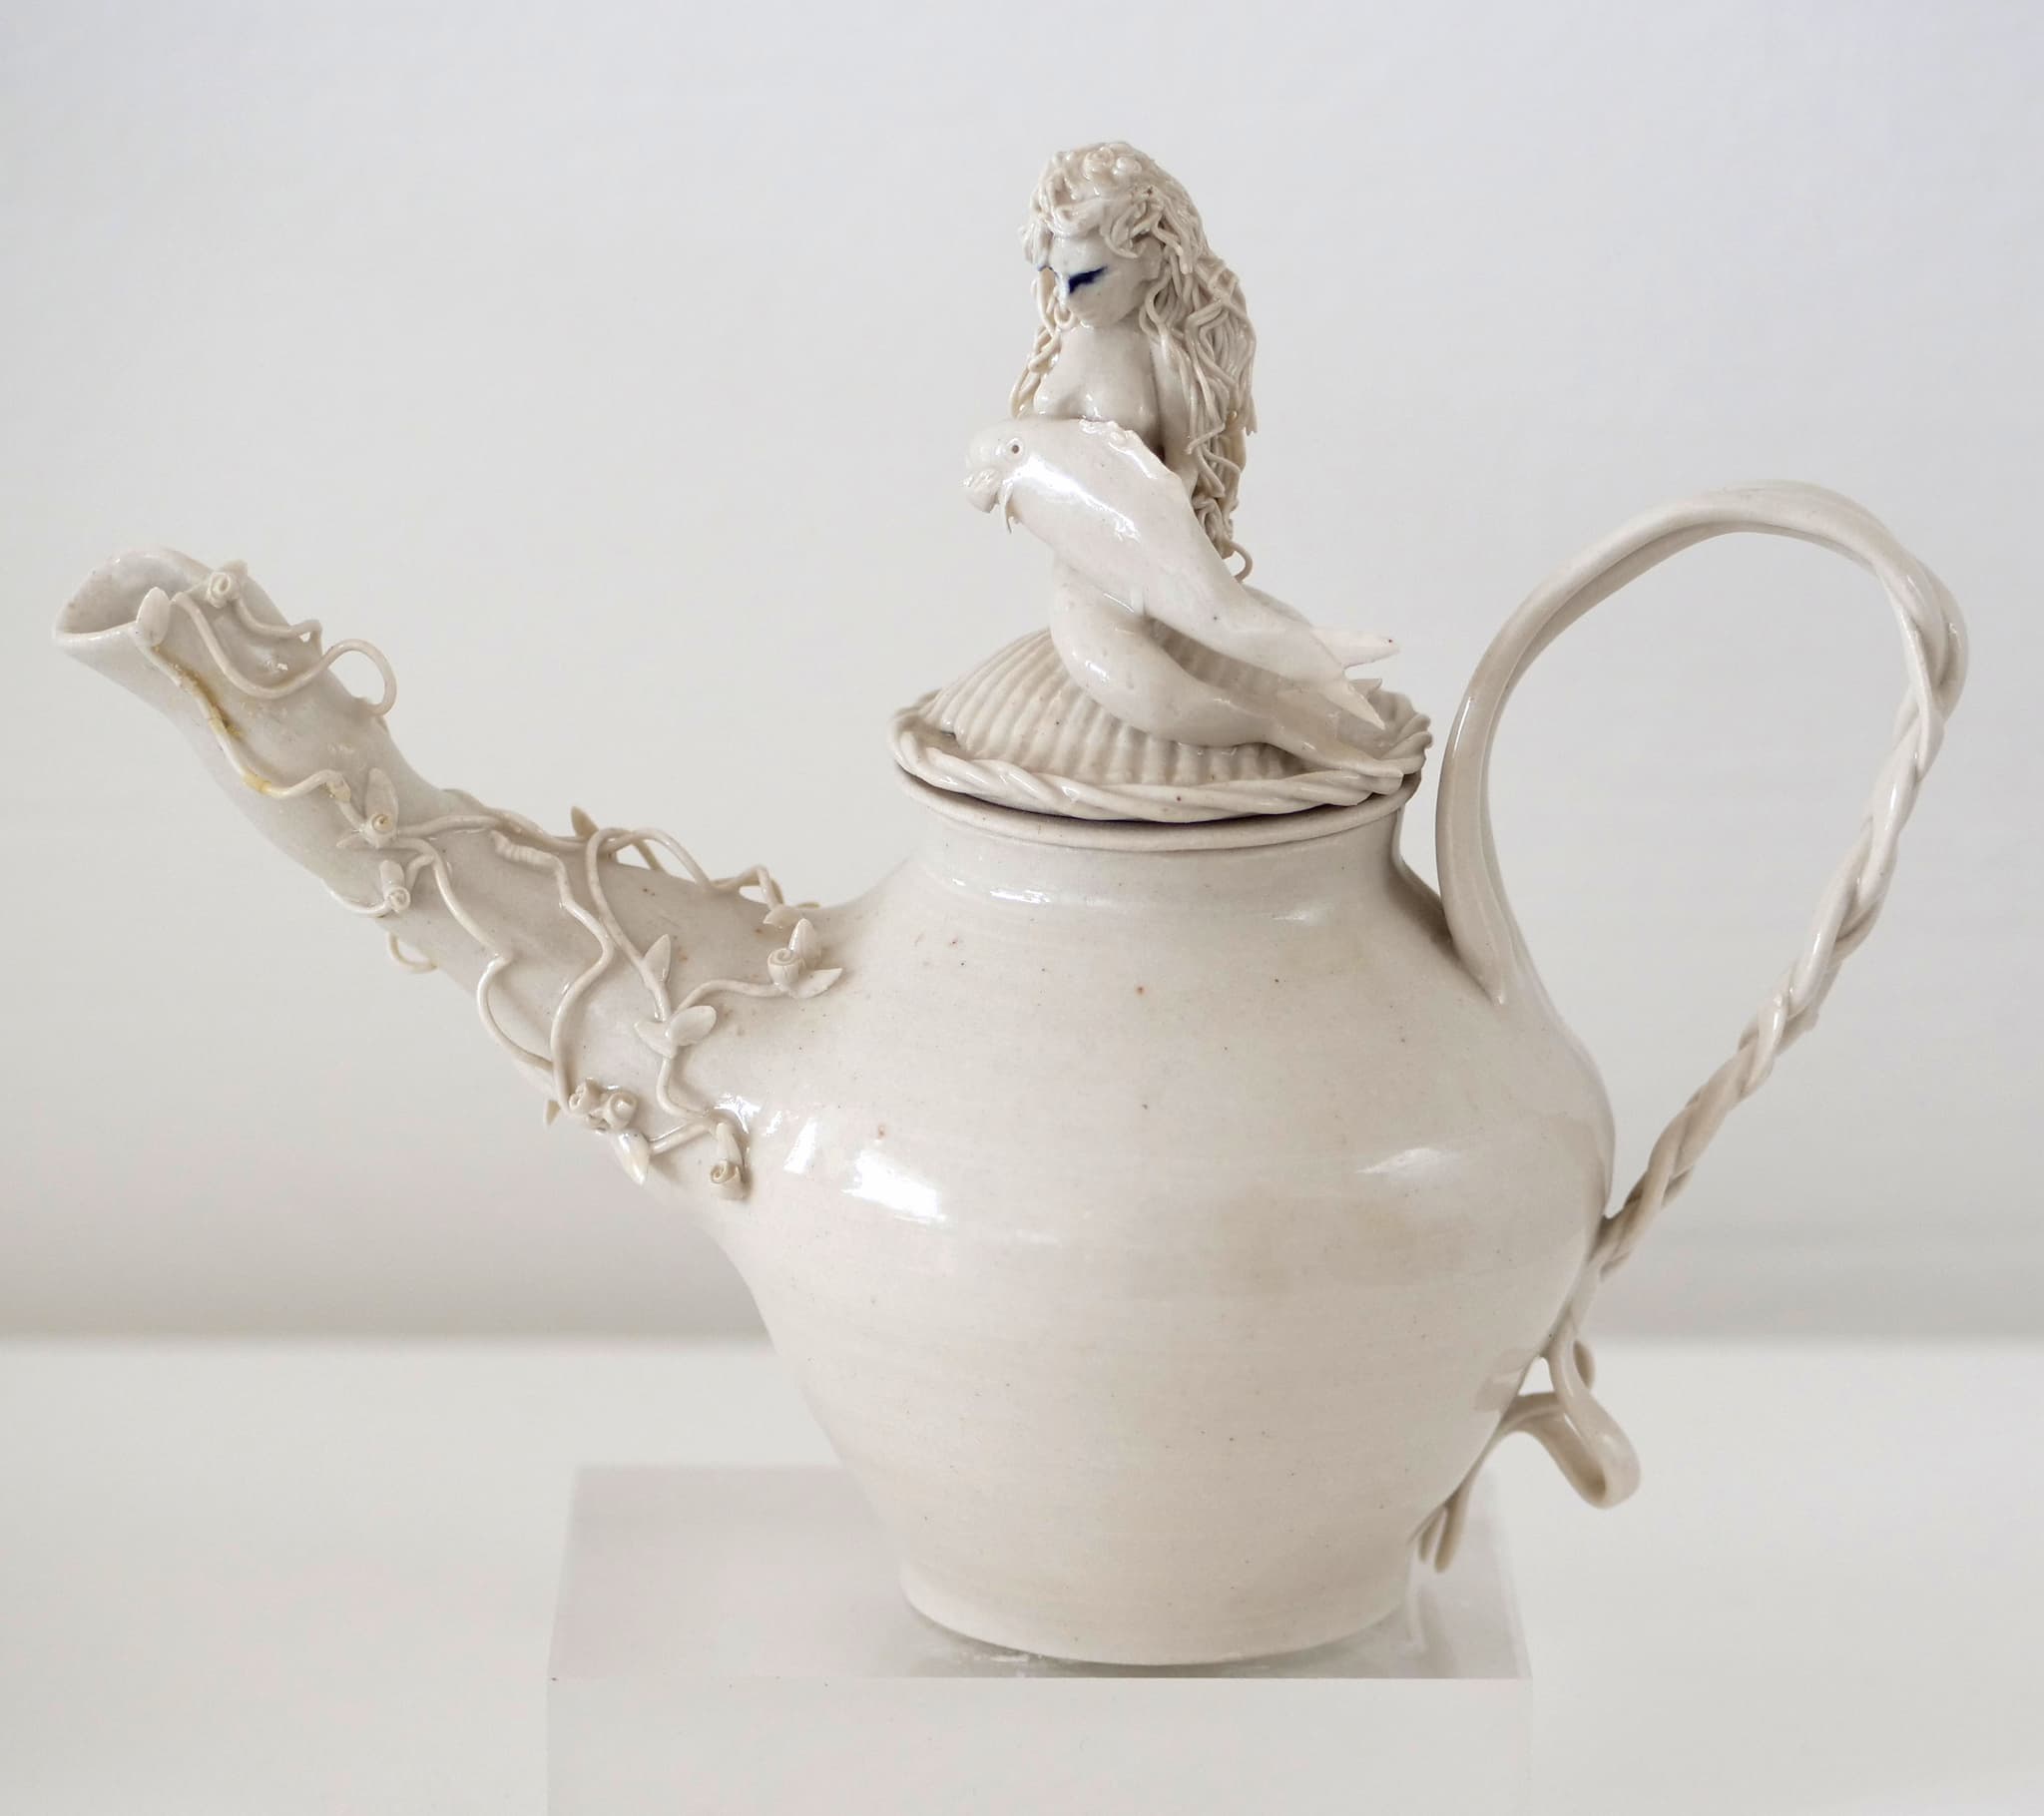 Coille Hooven, Teapot, 1976, California Visionaries: Seminal Studio Craft, Featuring Works from the Forrest L. Merrill Collection